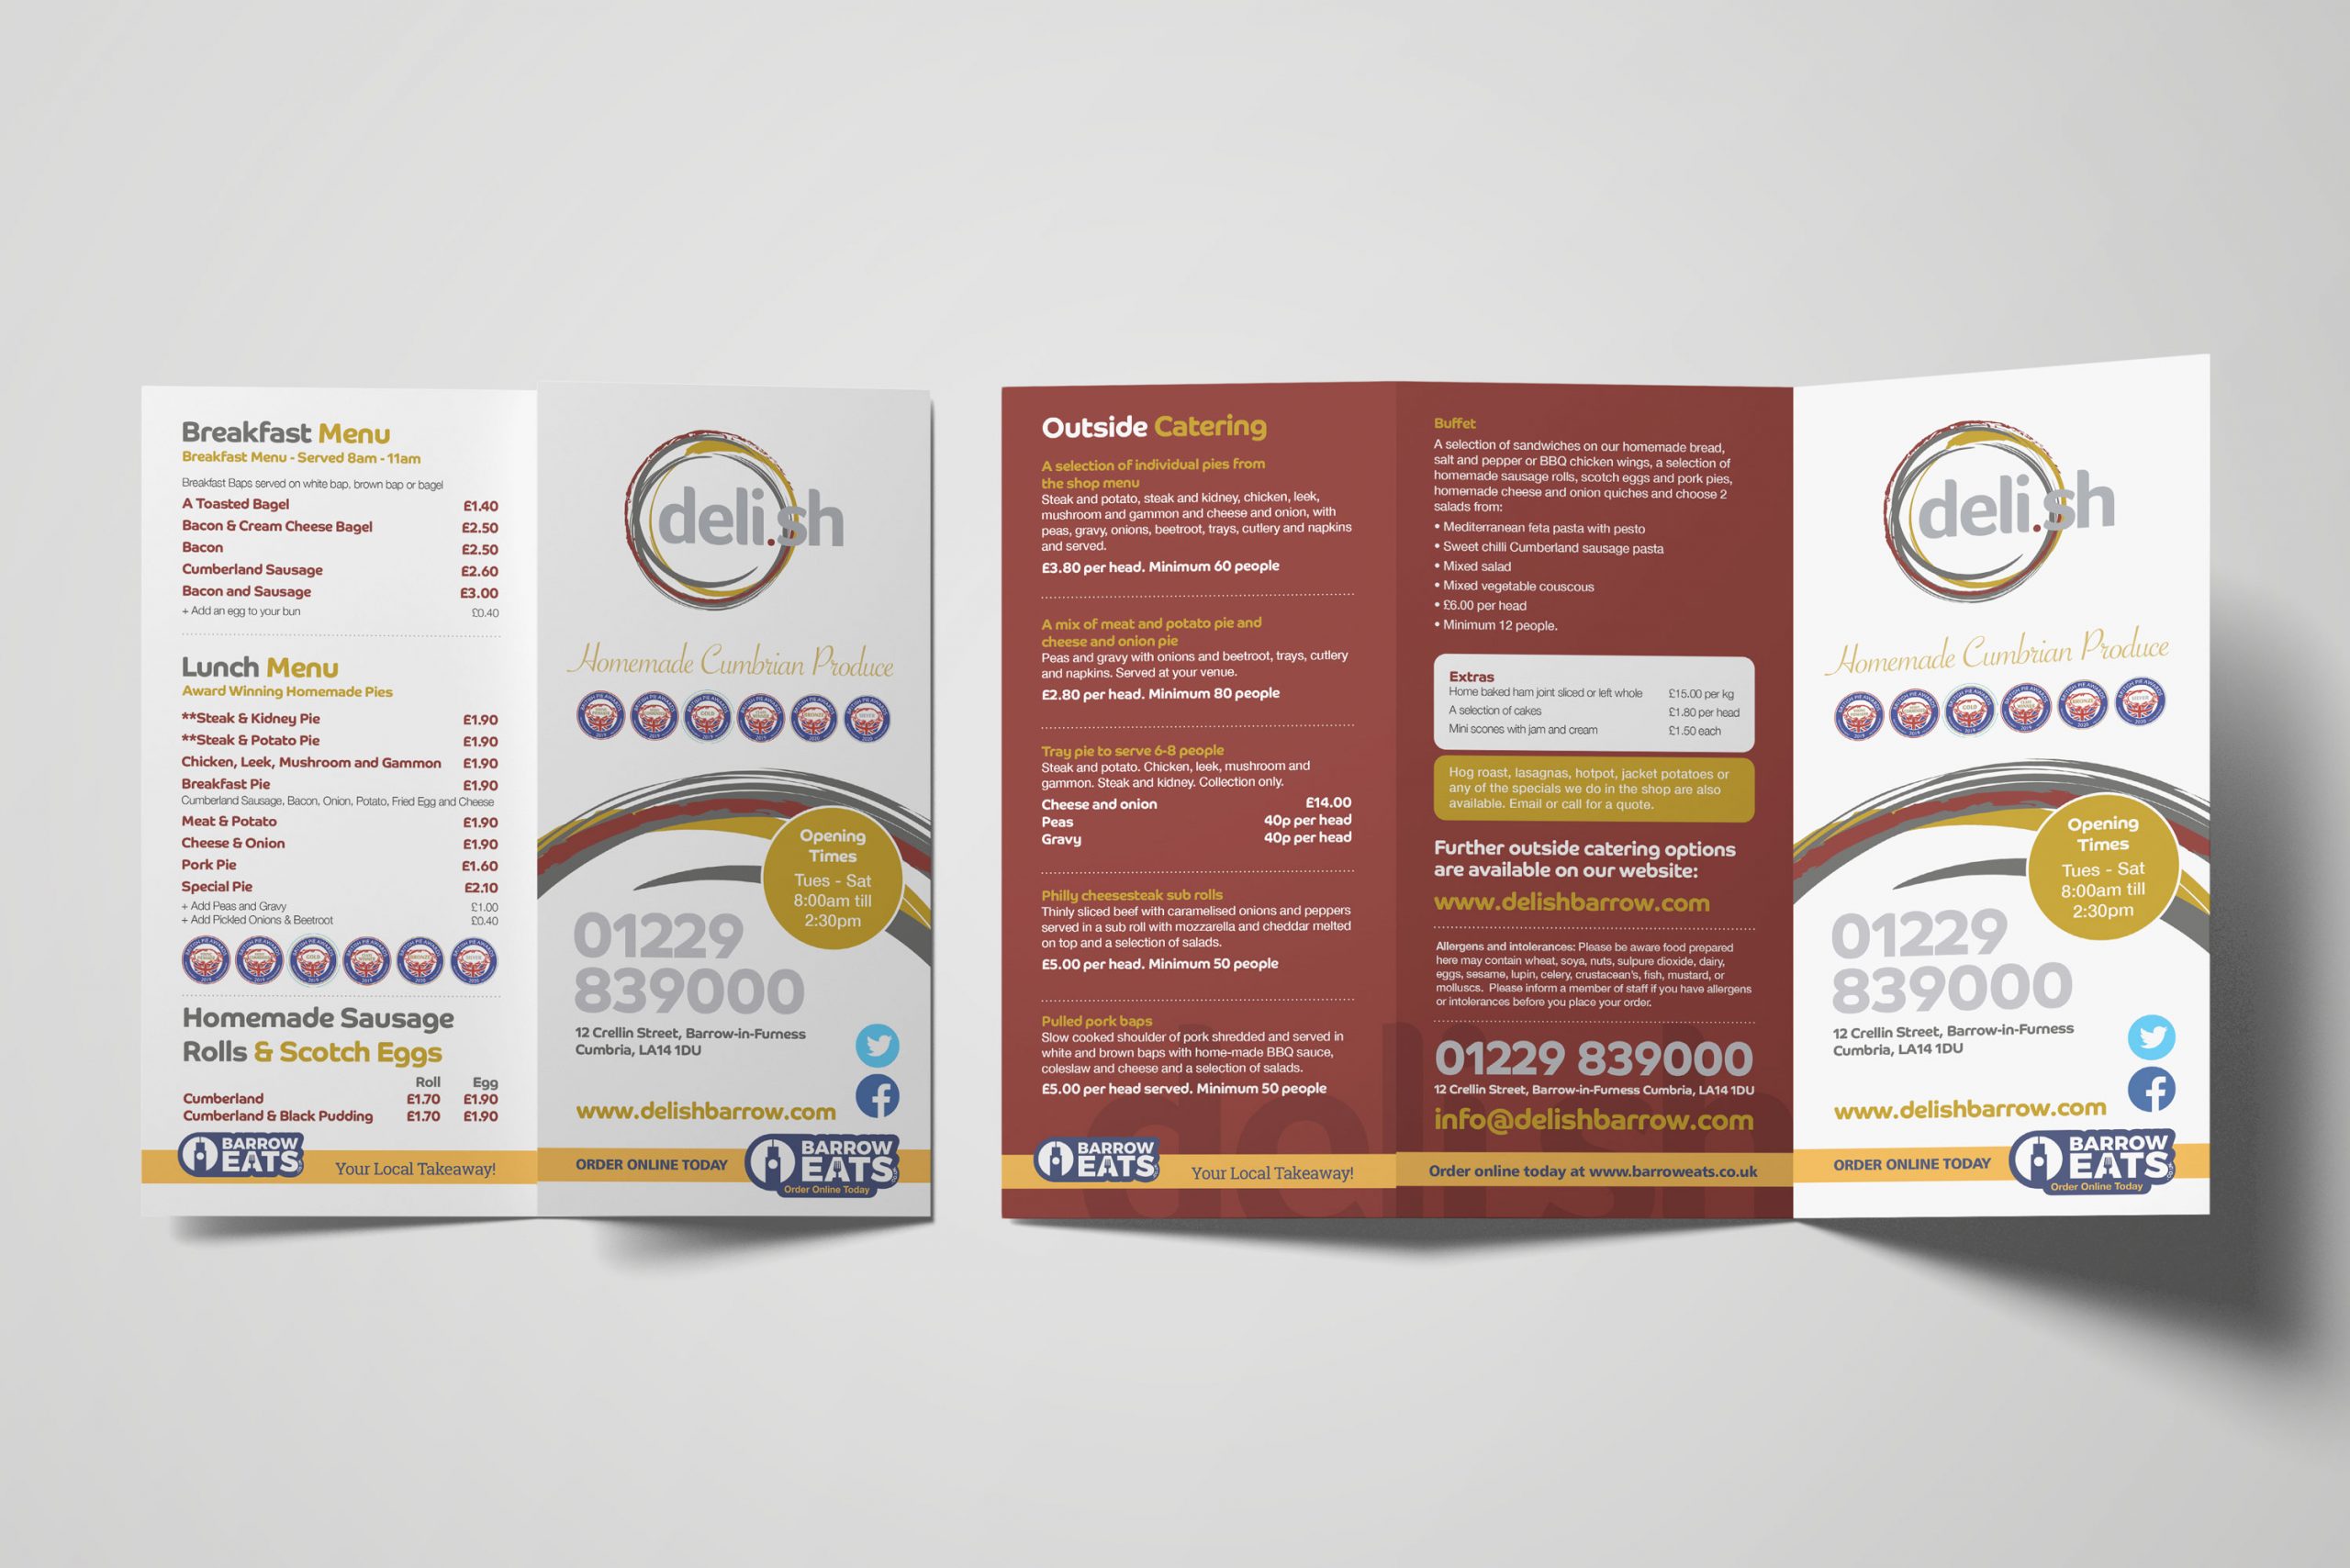 Takeaway Leaflet Design & Print Home / Graphic Design / Takeaway Leaflet Design & Print